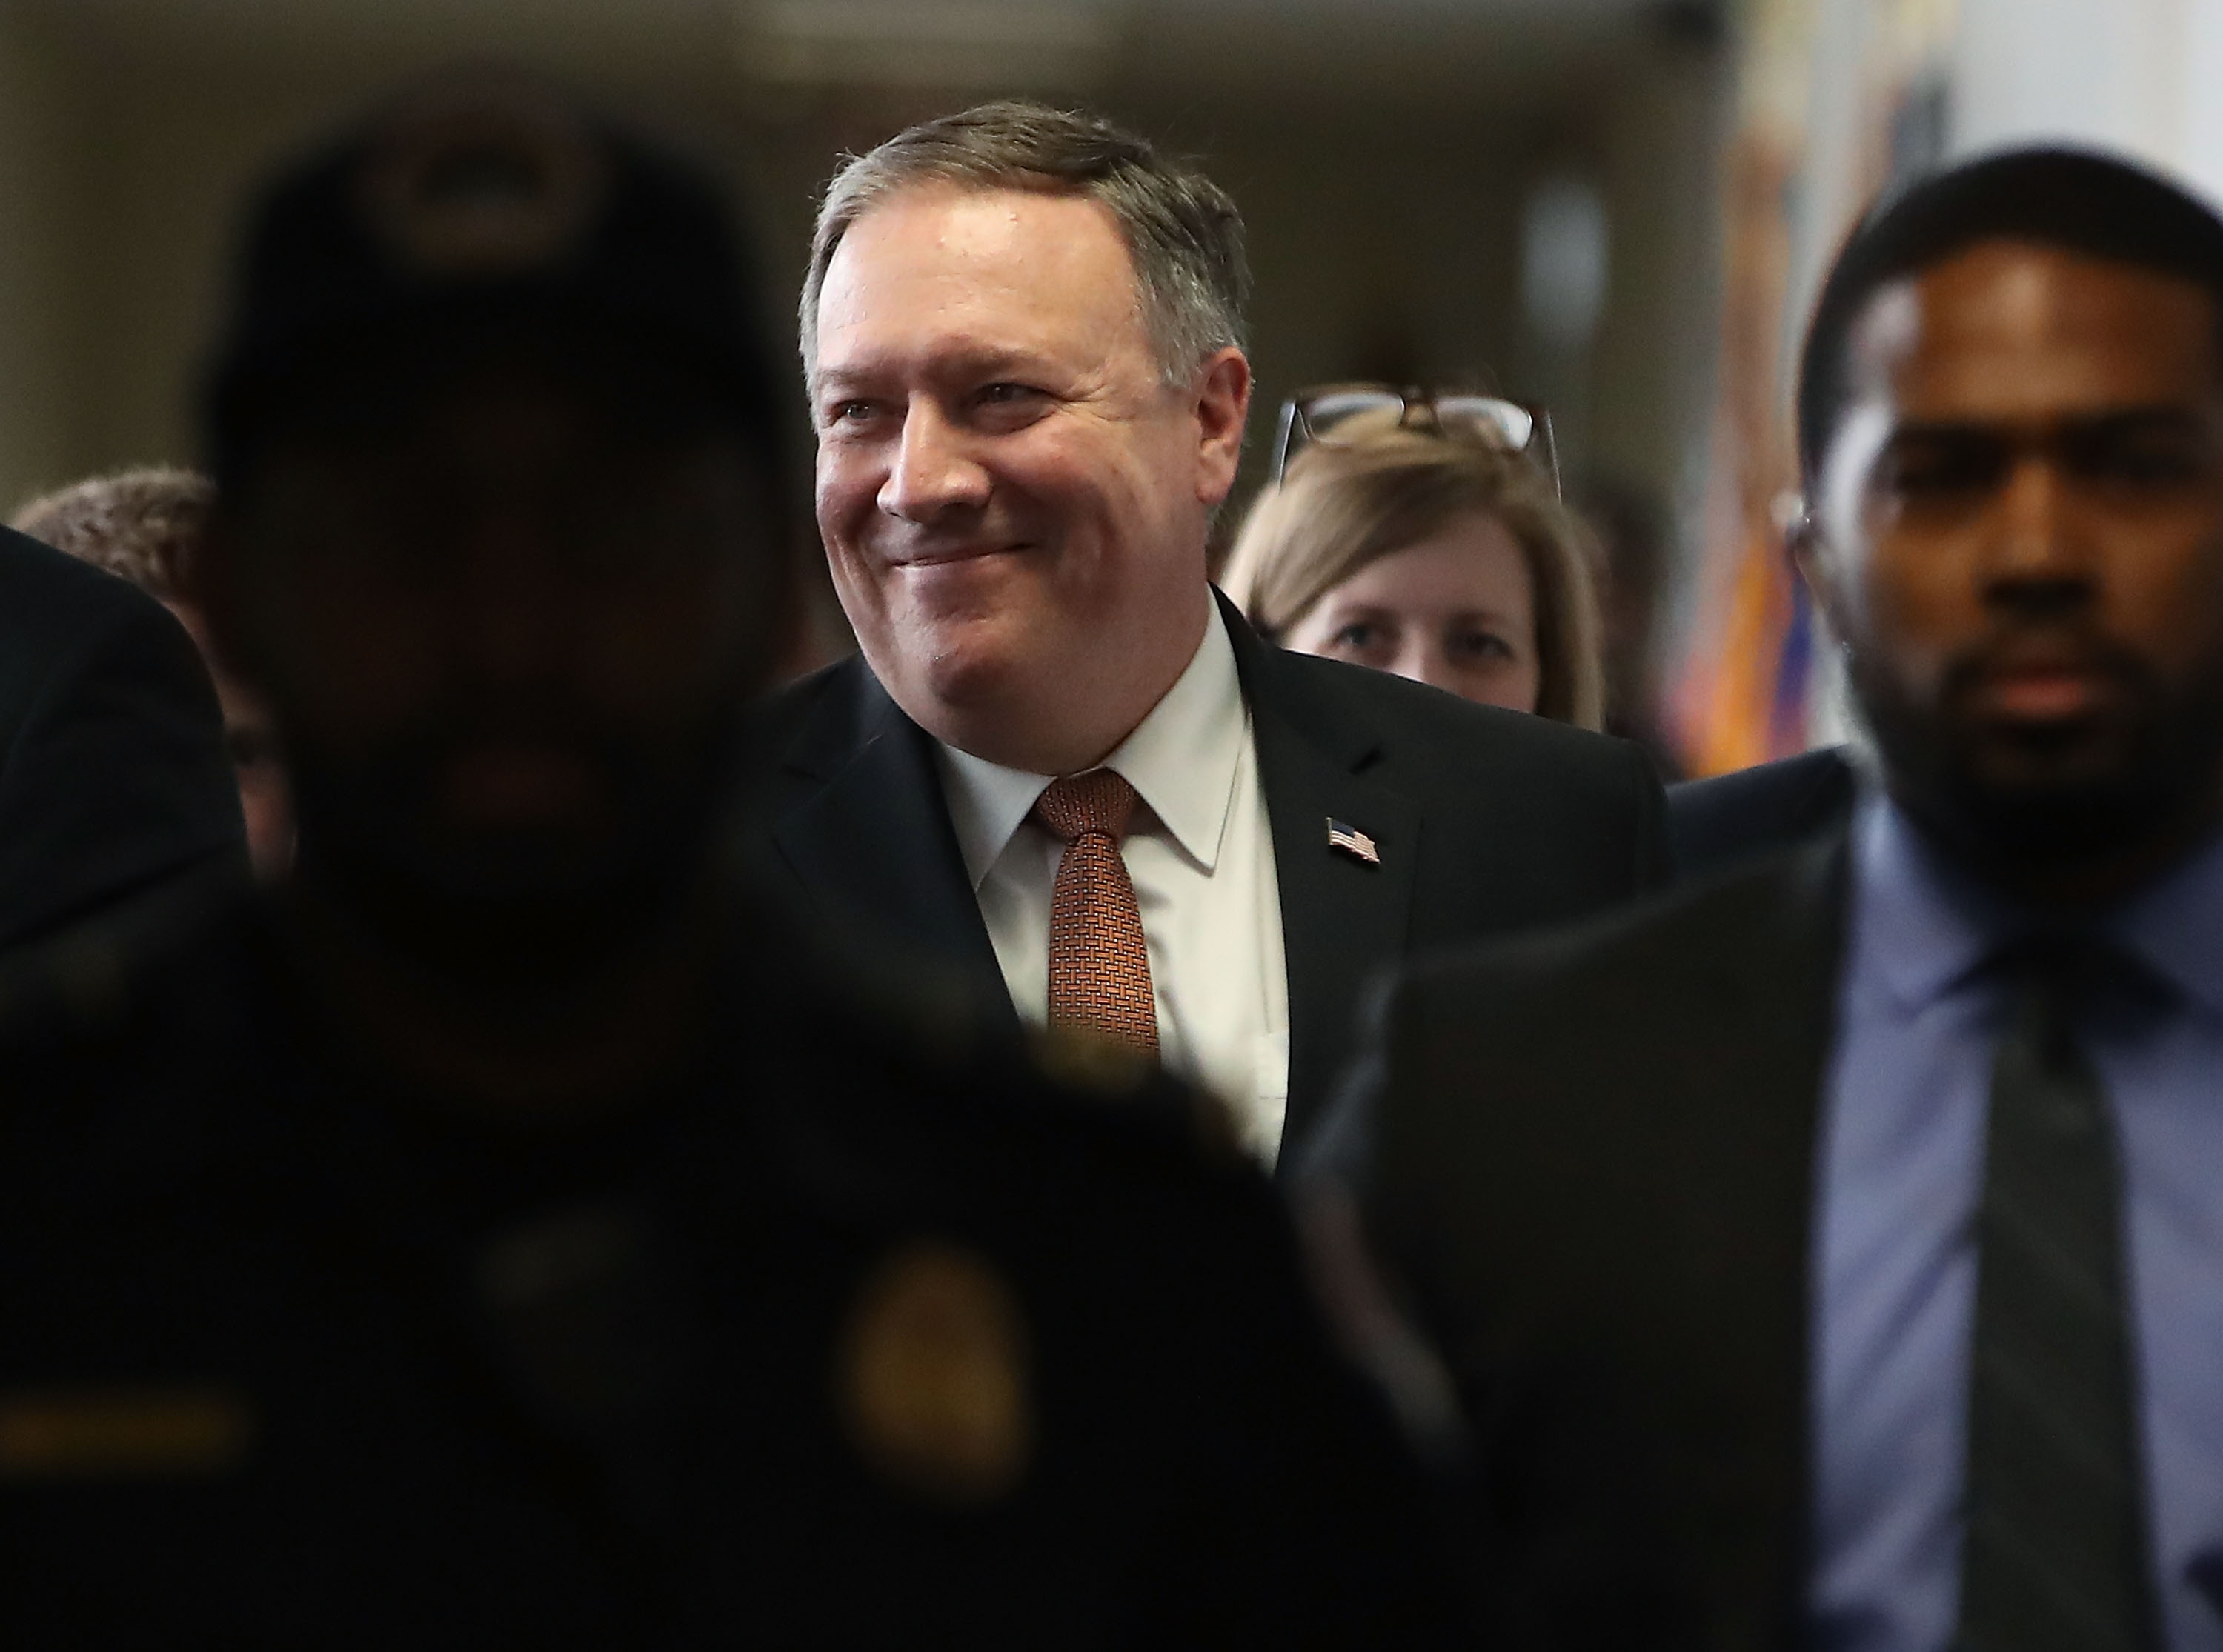 CIA Director Mike Pompeo smiles as he walks to a meeting with Sen. Mark Warner (D-VA) on Capitol Hill April 18, 2018 in Washington, DC. (Mark Wilson—Getty Images)